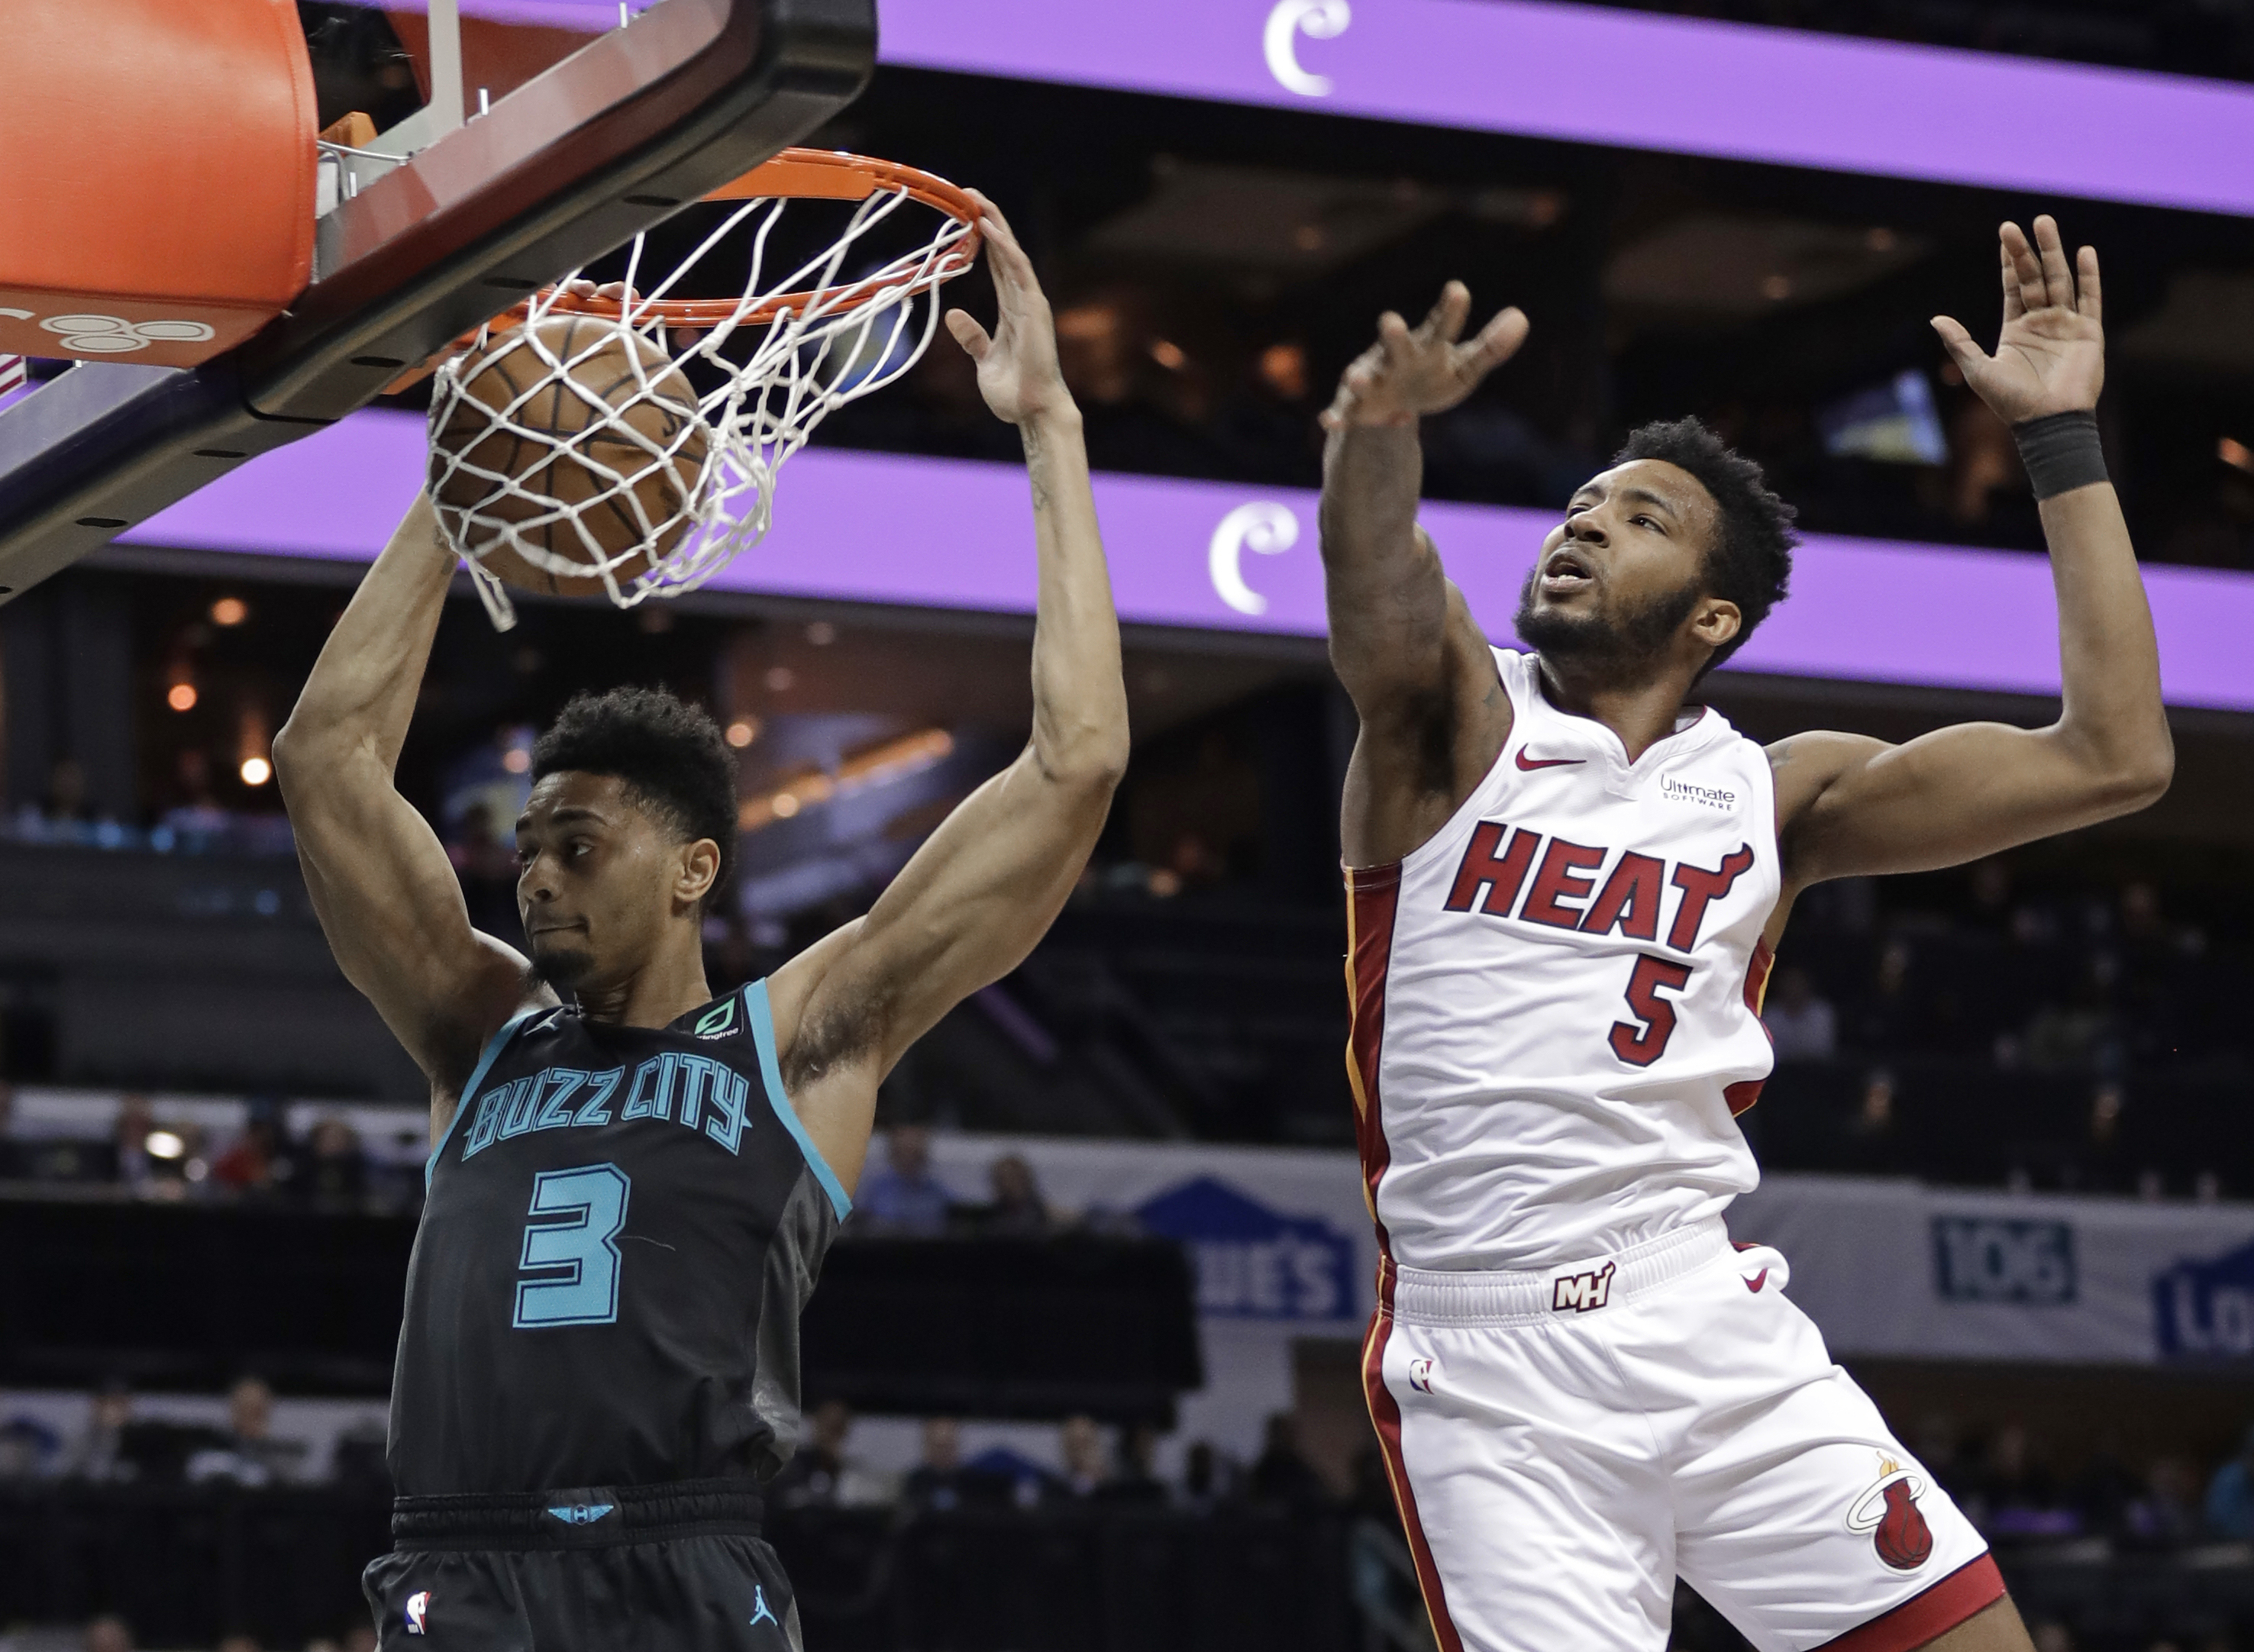 Olynyk, Whiteside lead Heat to a 91-84 win over Hornets